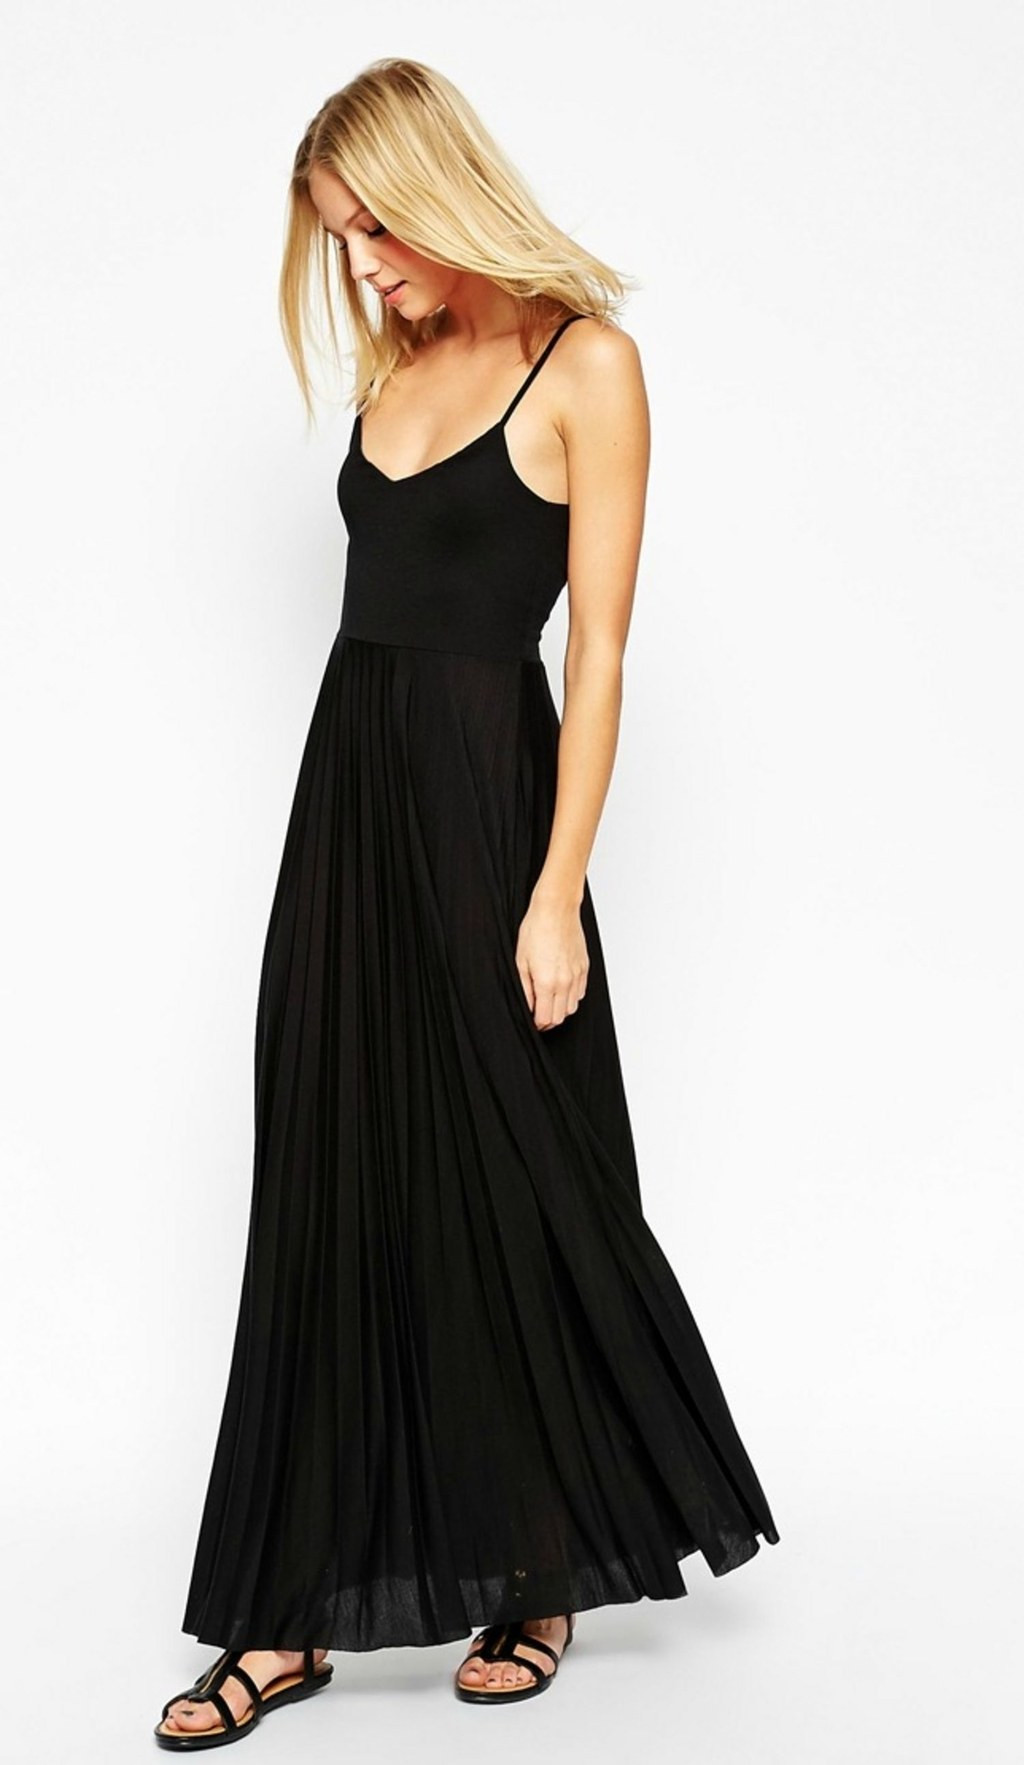 Black Dress To Wedding
 Can You Wear Black to a Wedding Wedding Guests Wearing